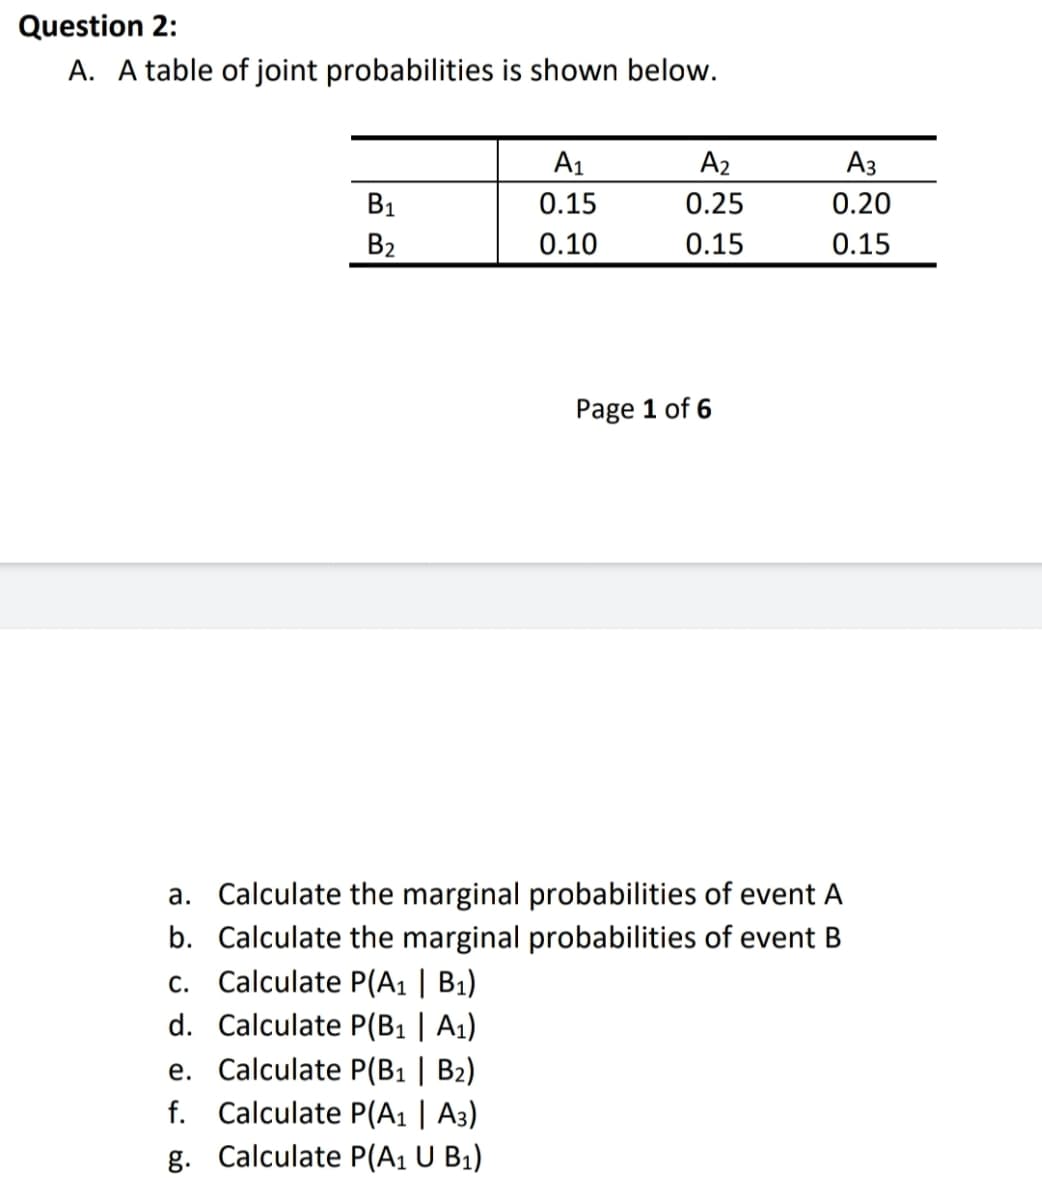 Question 2:
A. A table of joint probabilities is shown below.
A1
A2
Аз
B1
0.15
0.25
0.20
B2
0.10
0.15
0.15
Page 1 of 6
a. Calculate the marginal probabilities of event A
b. Calculate the marginal probabilities of event B
c. Calculate P(A1 | B1)
d. Calculate P(B1 | A1)
e. Calculate P(B1 | B2)
f. Calculate P(A1 | A3)
g. Calculate P(A1 U B1)
